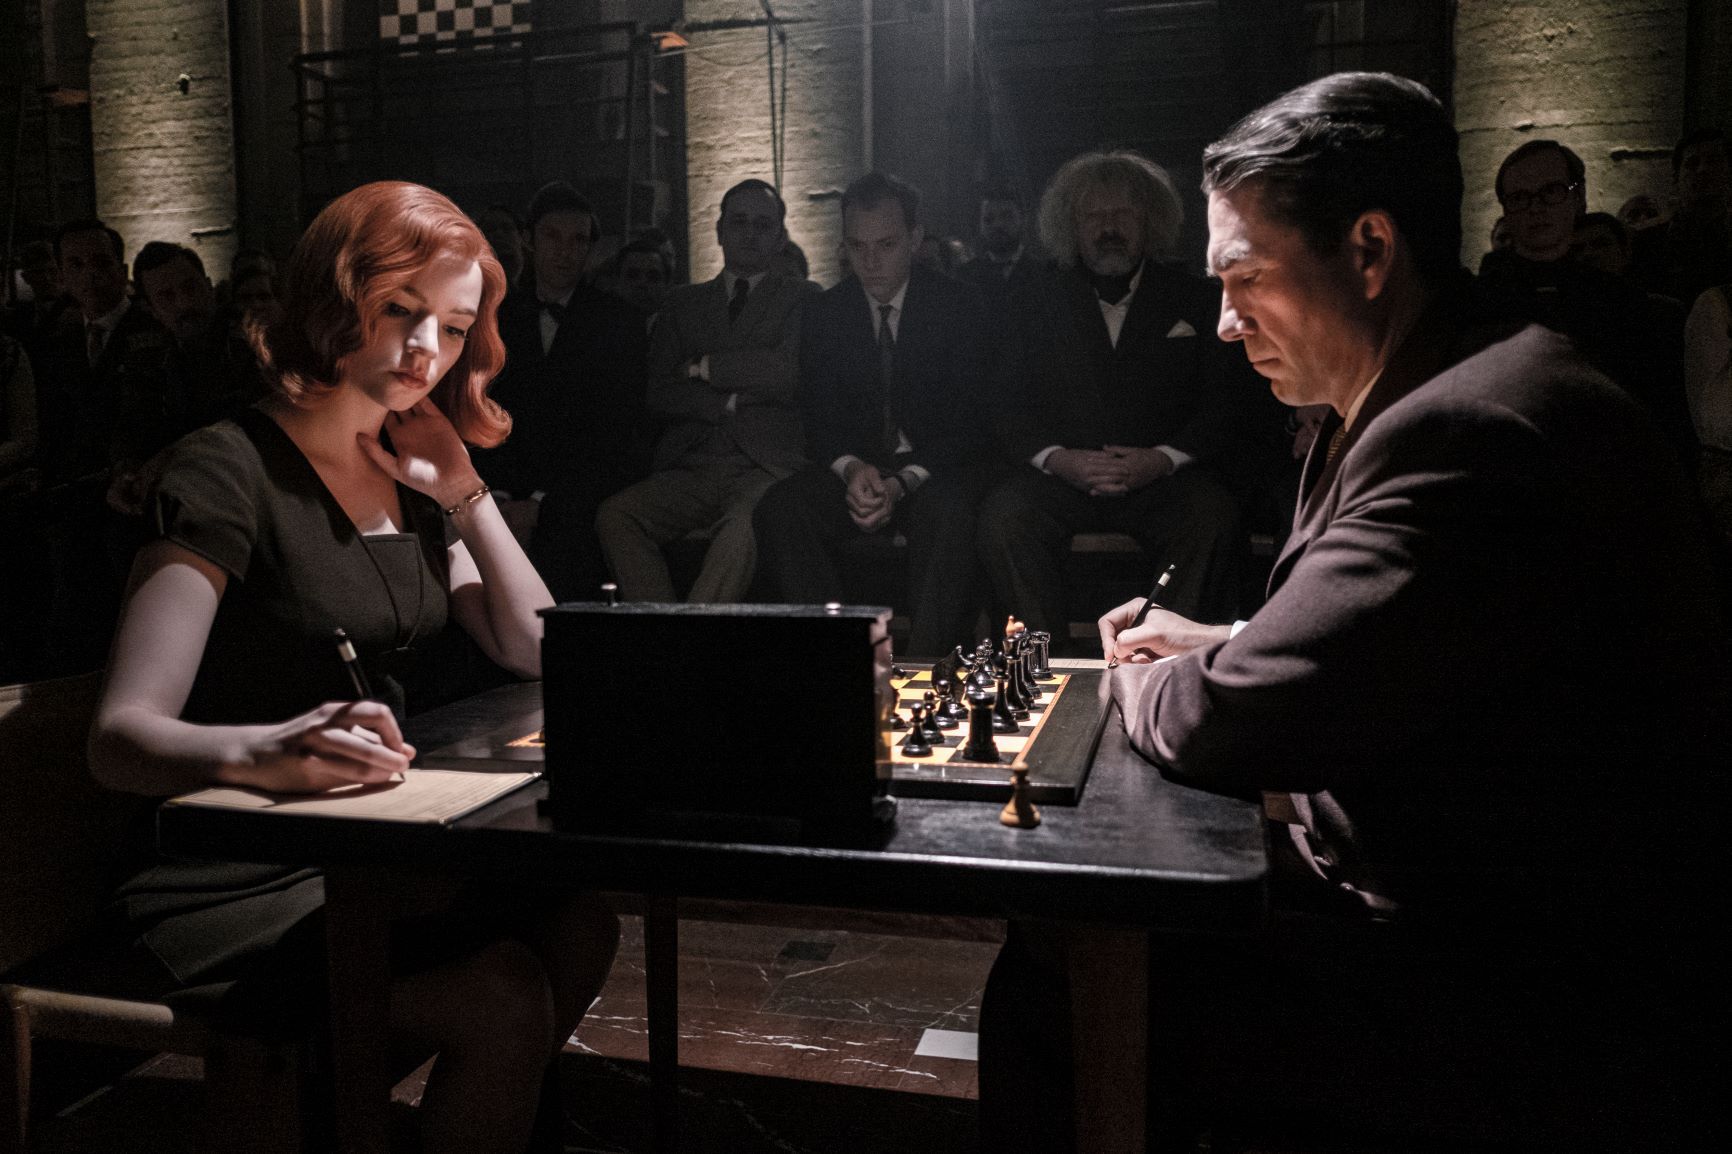 Does Beth beat Borgov in The Queen's Gambit? The final match of Netflix's chess series explained